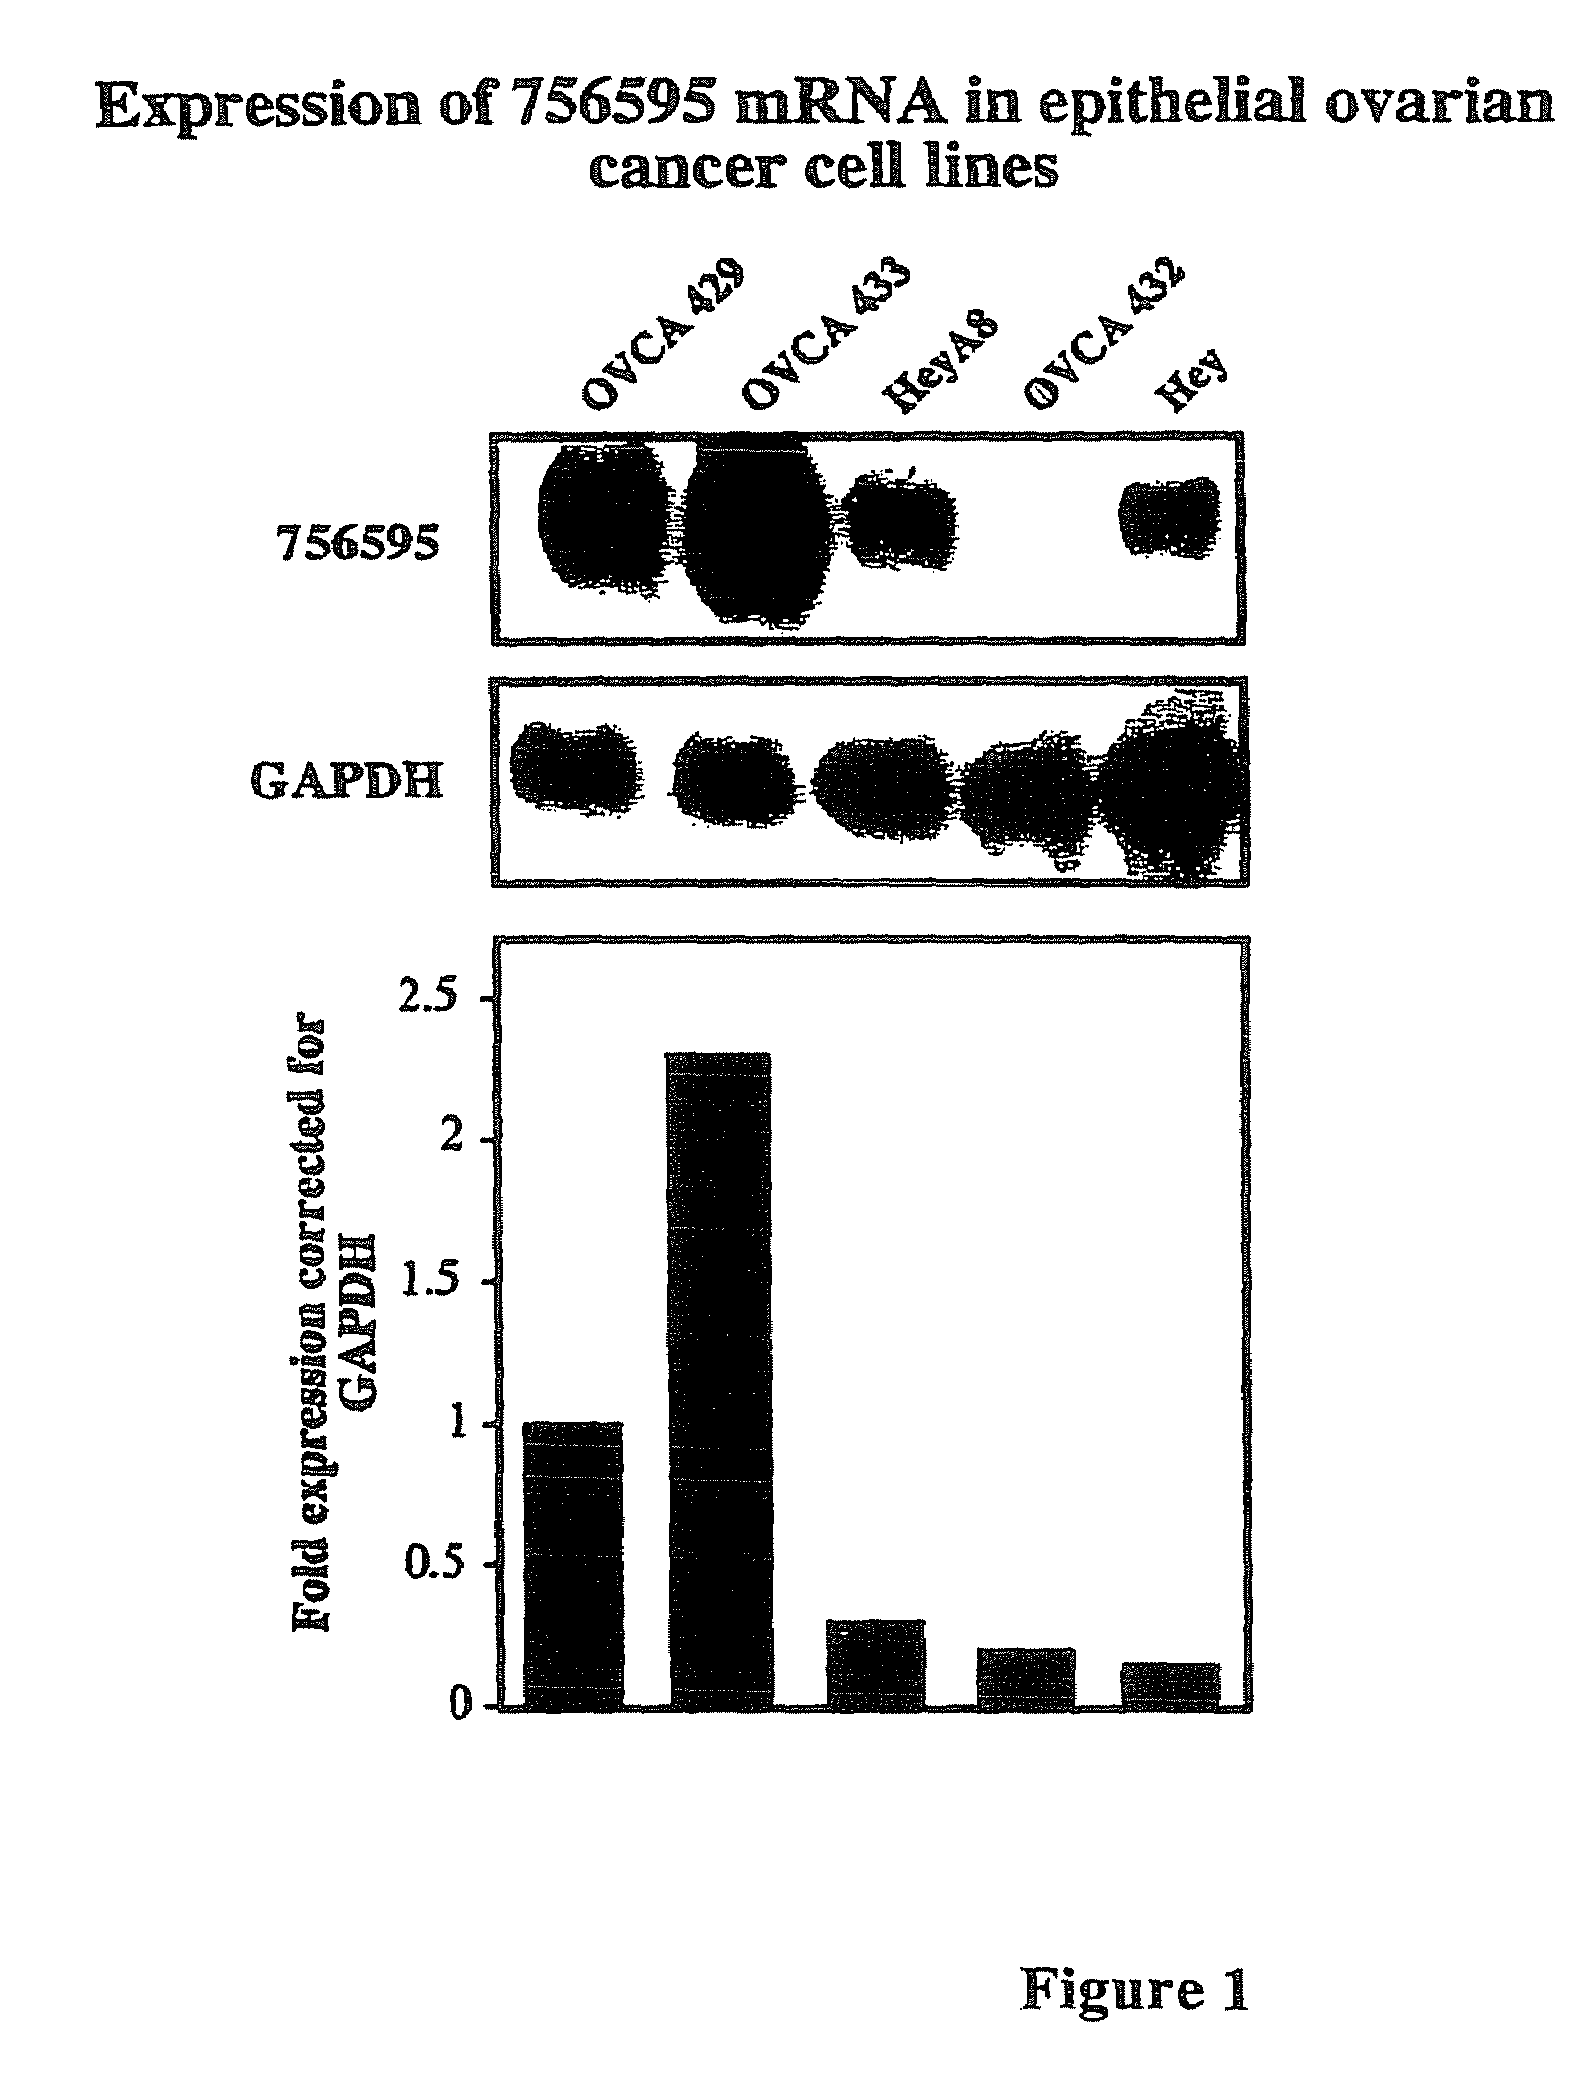 Methods for assessing cisplatin resistance, disease progression, and treatment efficacy in ovarian cancer